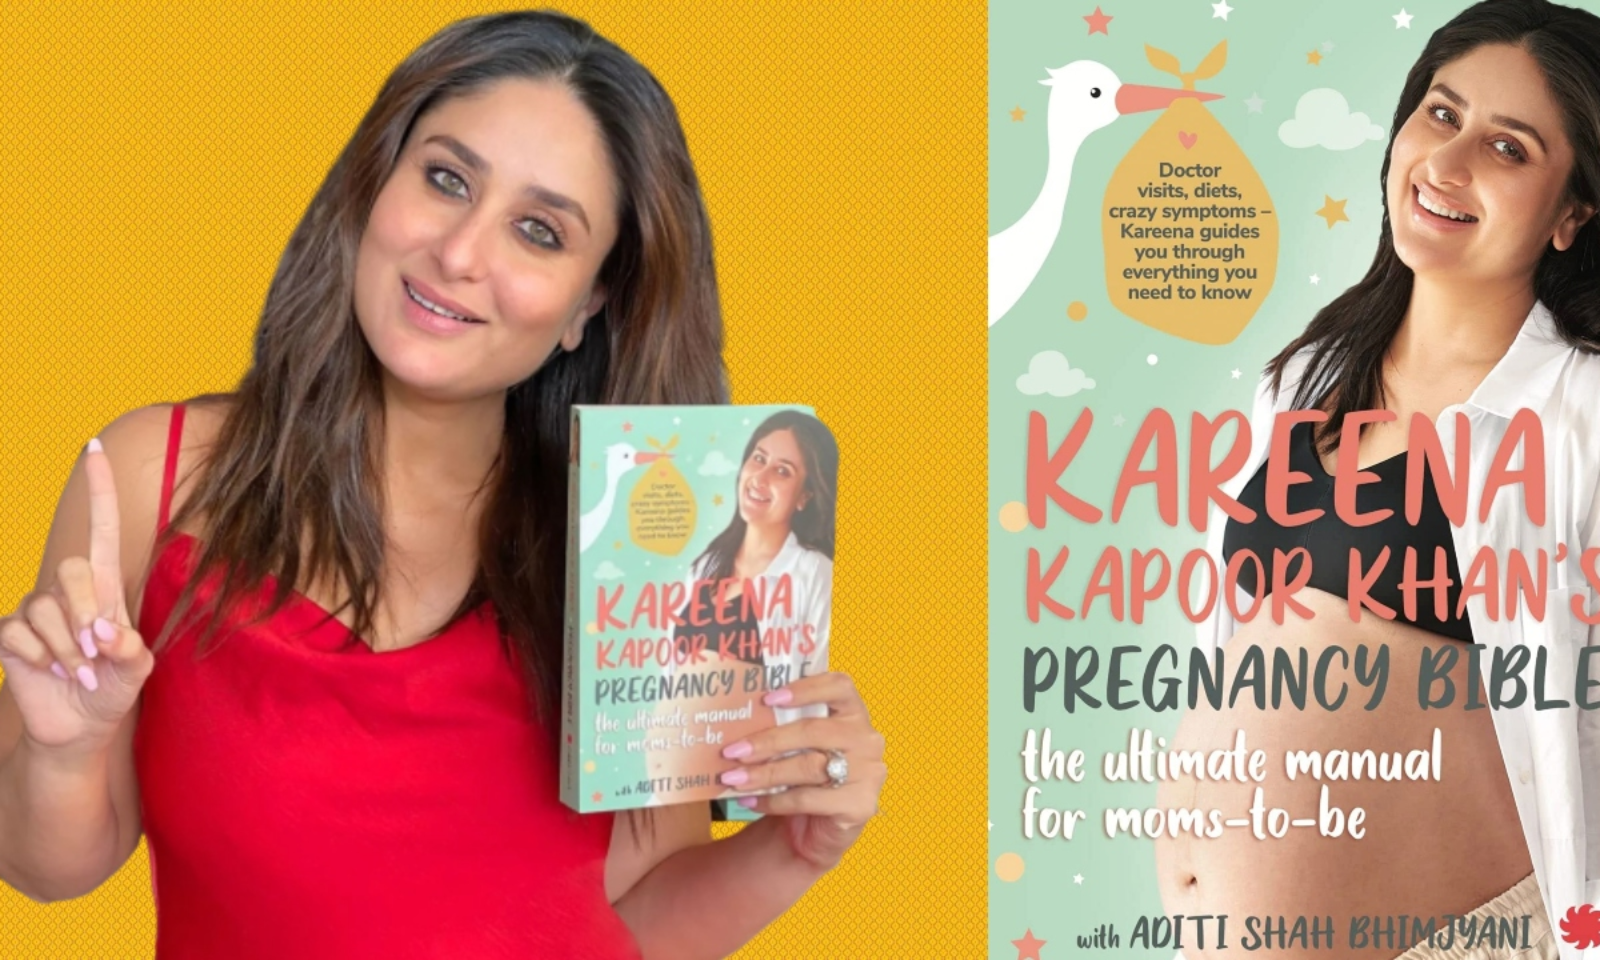 High Court sent notice to the actress, questions raised about Kareena Kapoor Khan's pregnancy Bible